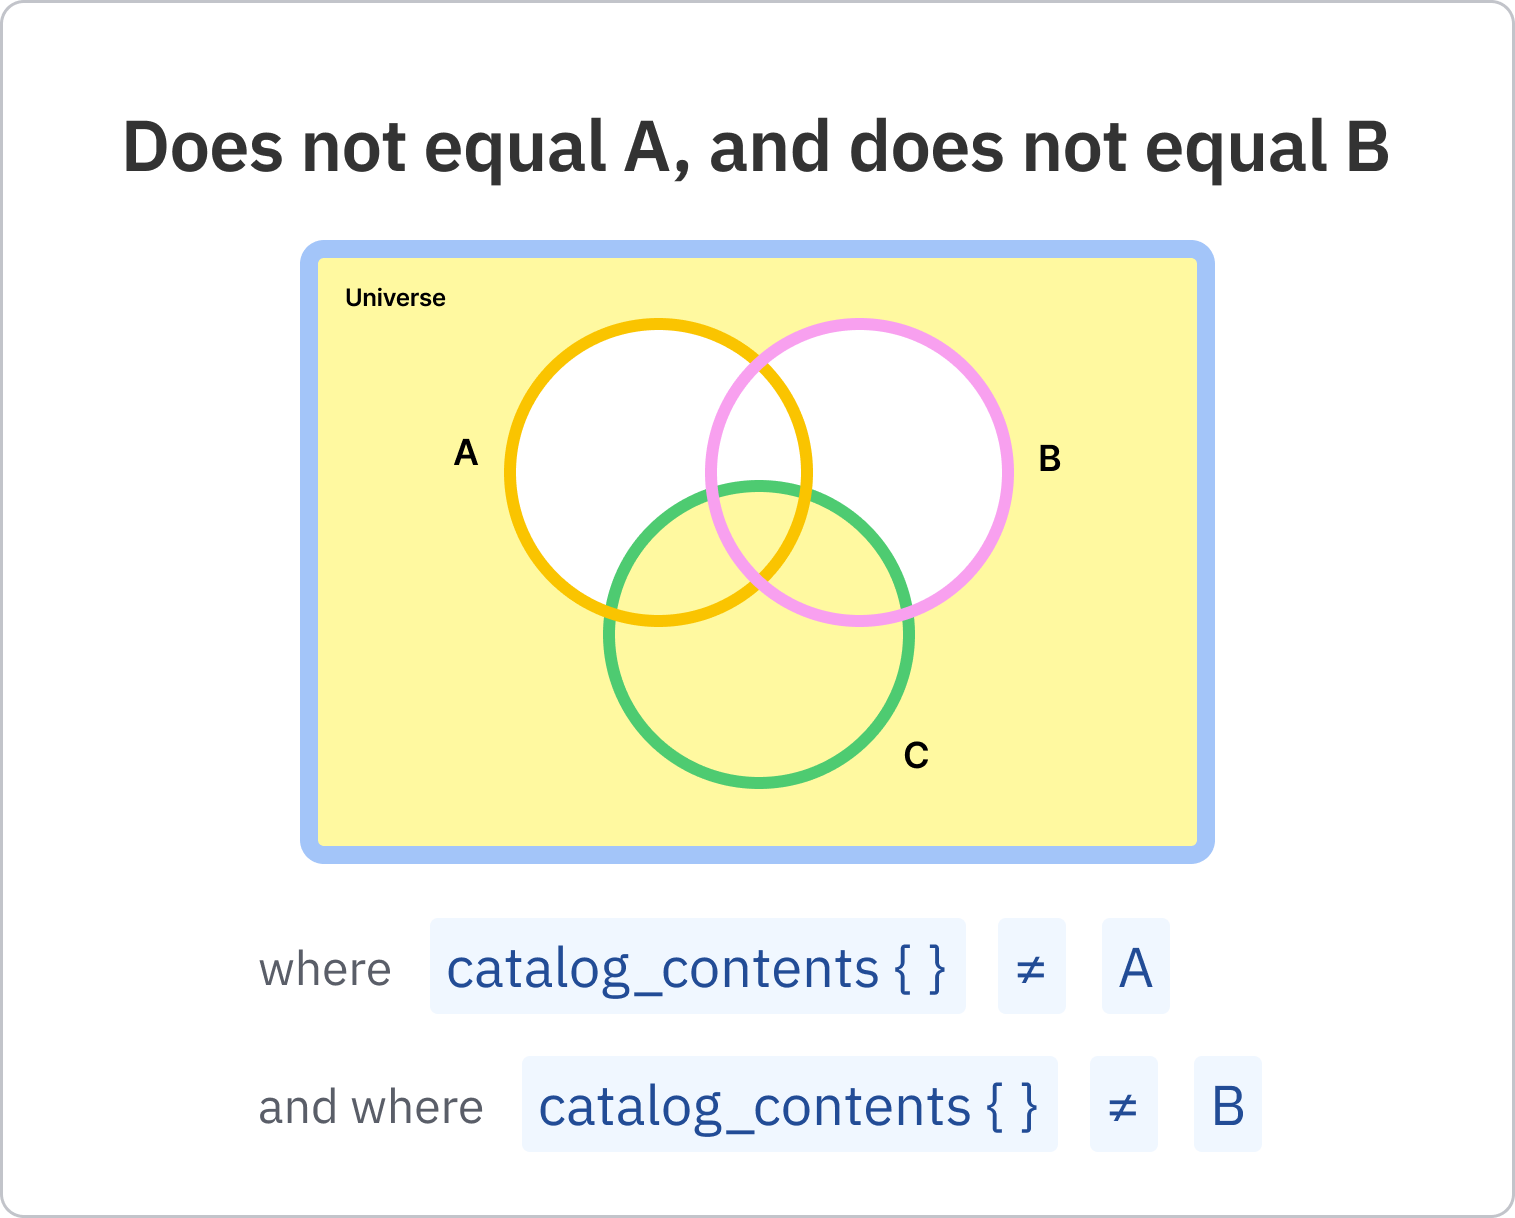 08_-_Does_not_equal_A__and_does_not_equal_B.png